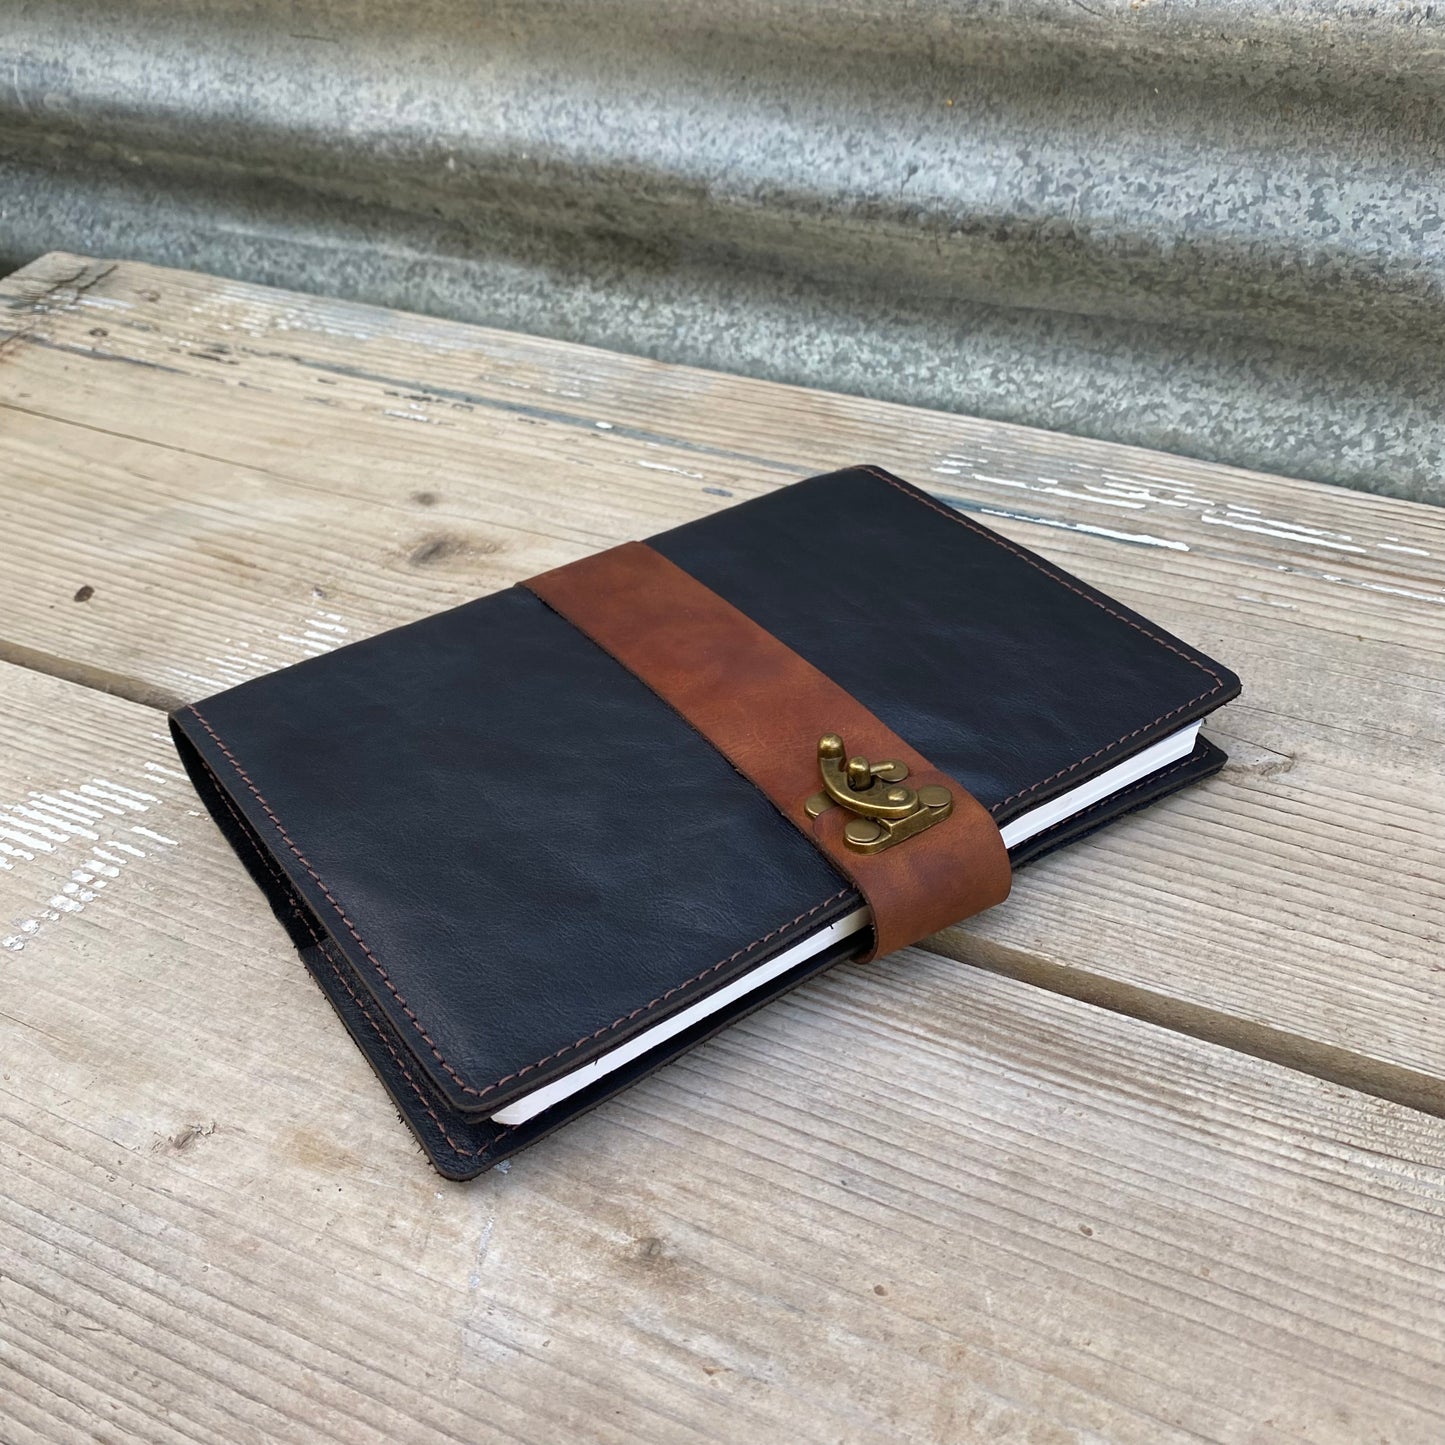 A4 & A5 Leather Art Book / Journal Cover $140-$240